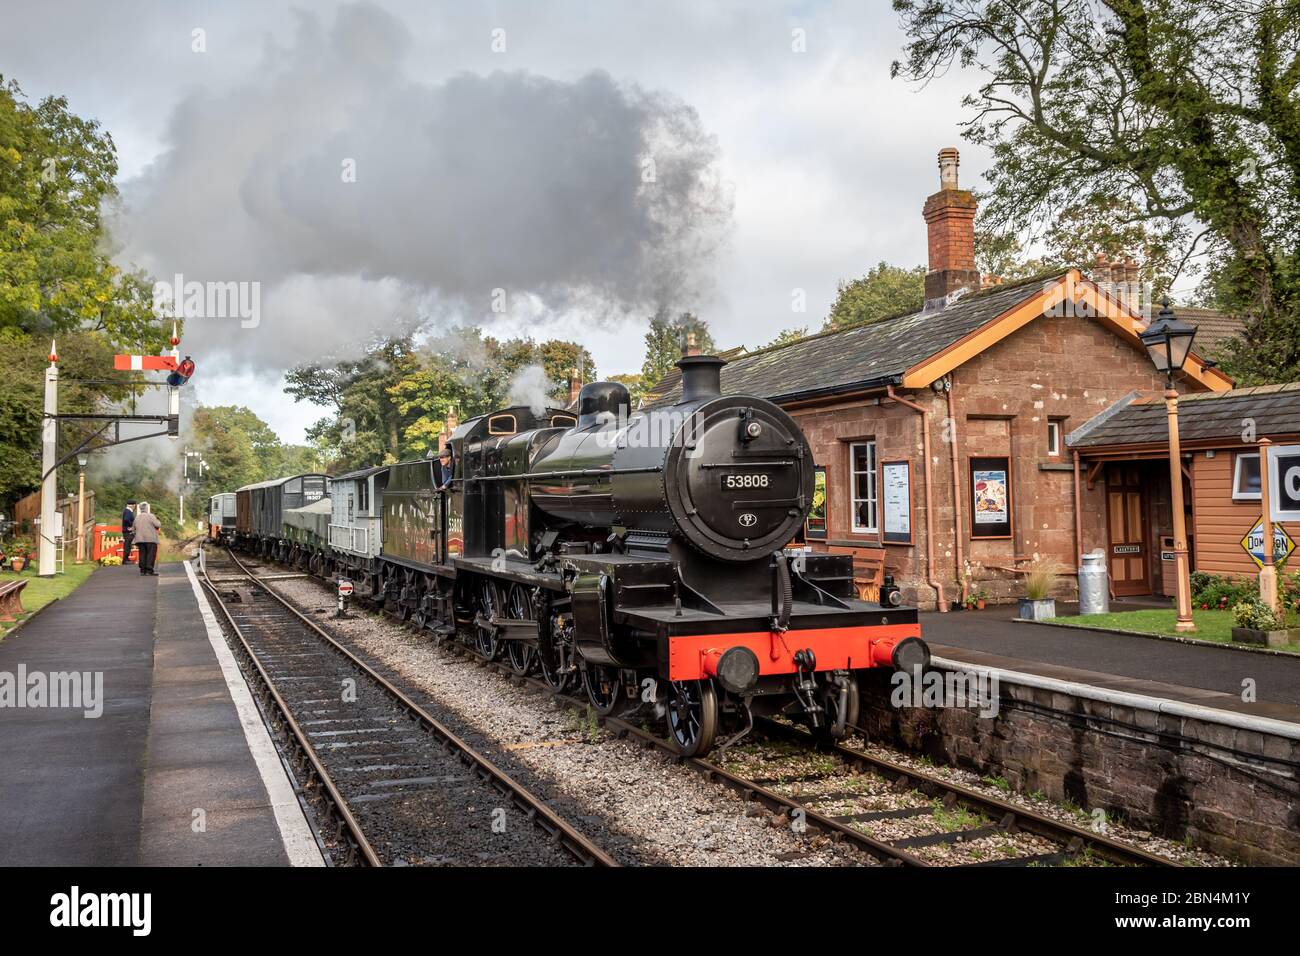 BR '7F' 2-8-0 No. 53808 arrives at Crowcombe Heathfield station during their Autumn Steam Gala Stock Photo